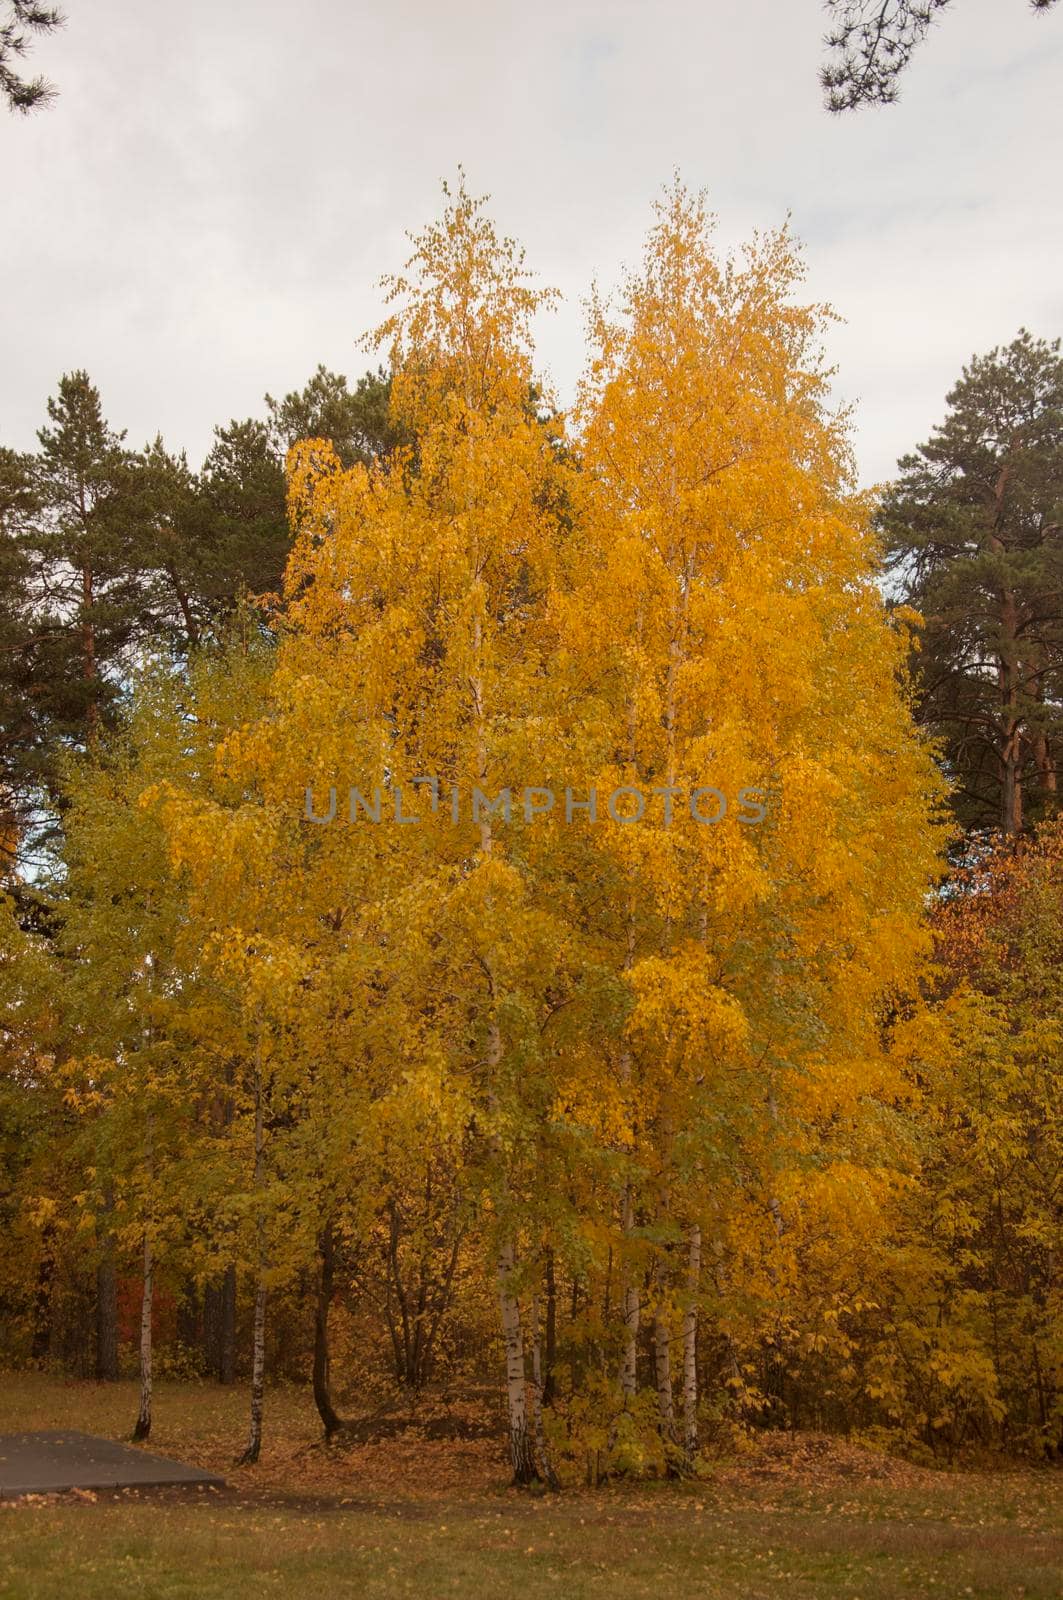 Autumn scenery. Beautiful gold fall in forest. Beautiful scene with birches in yellow autumn birch forest in october among other birches in birch grove